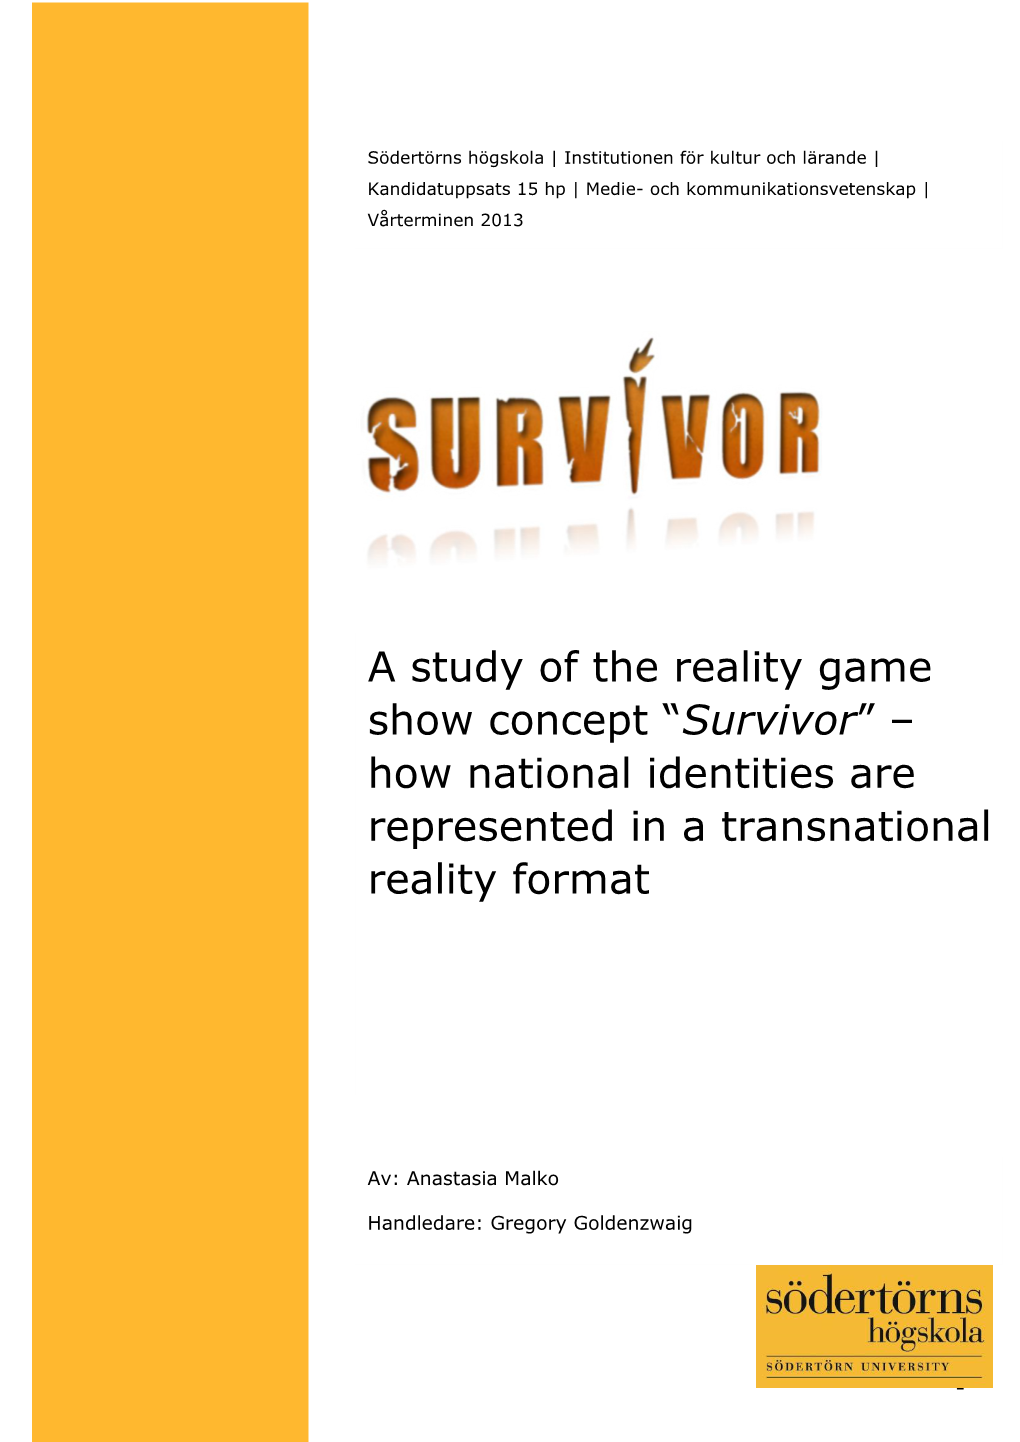 Survivor” – How National Identities Are Represented in a Transnational Reality Format